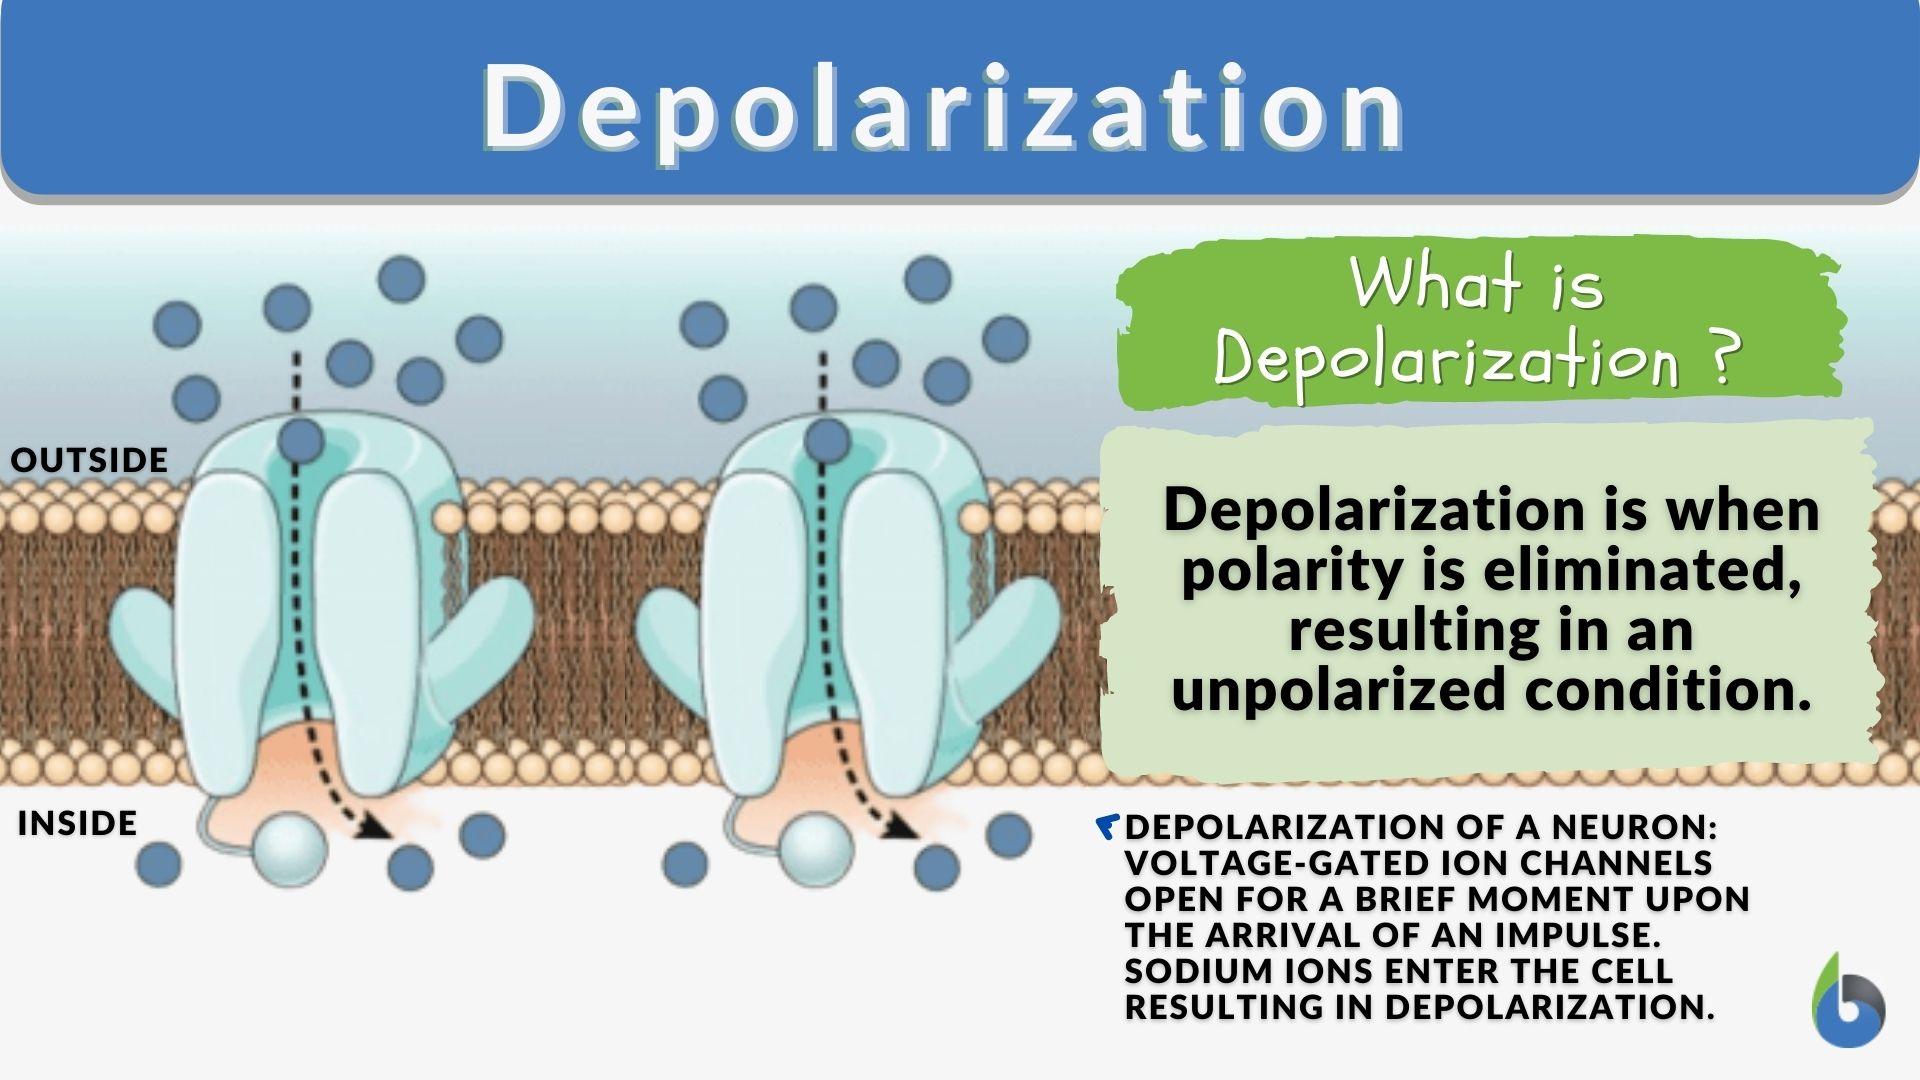 Depolarization - Definition and Examples - Biology Online Dictionary